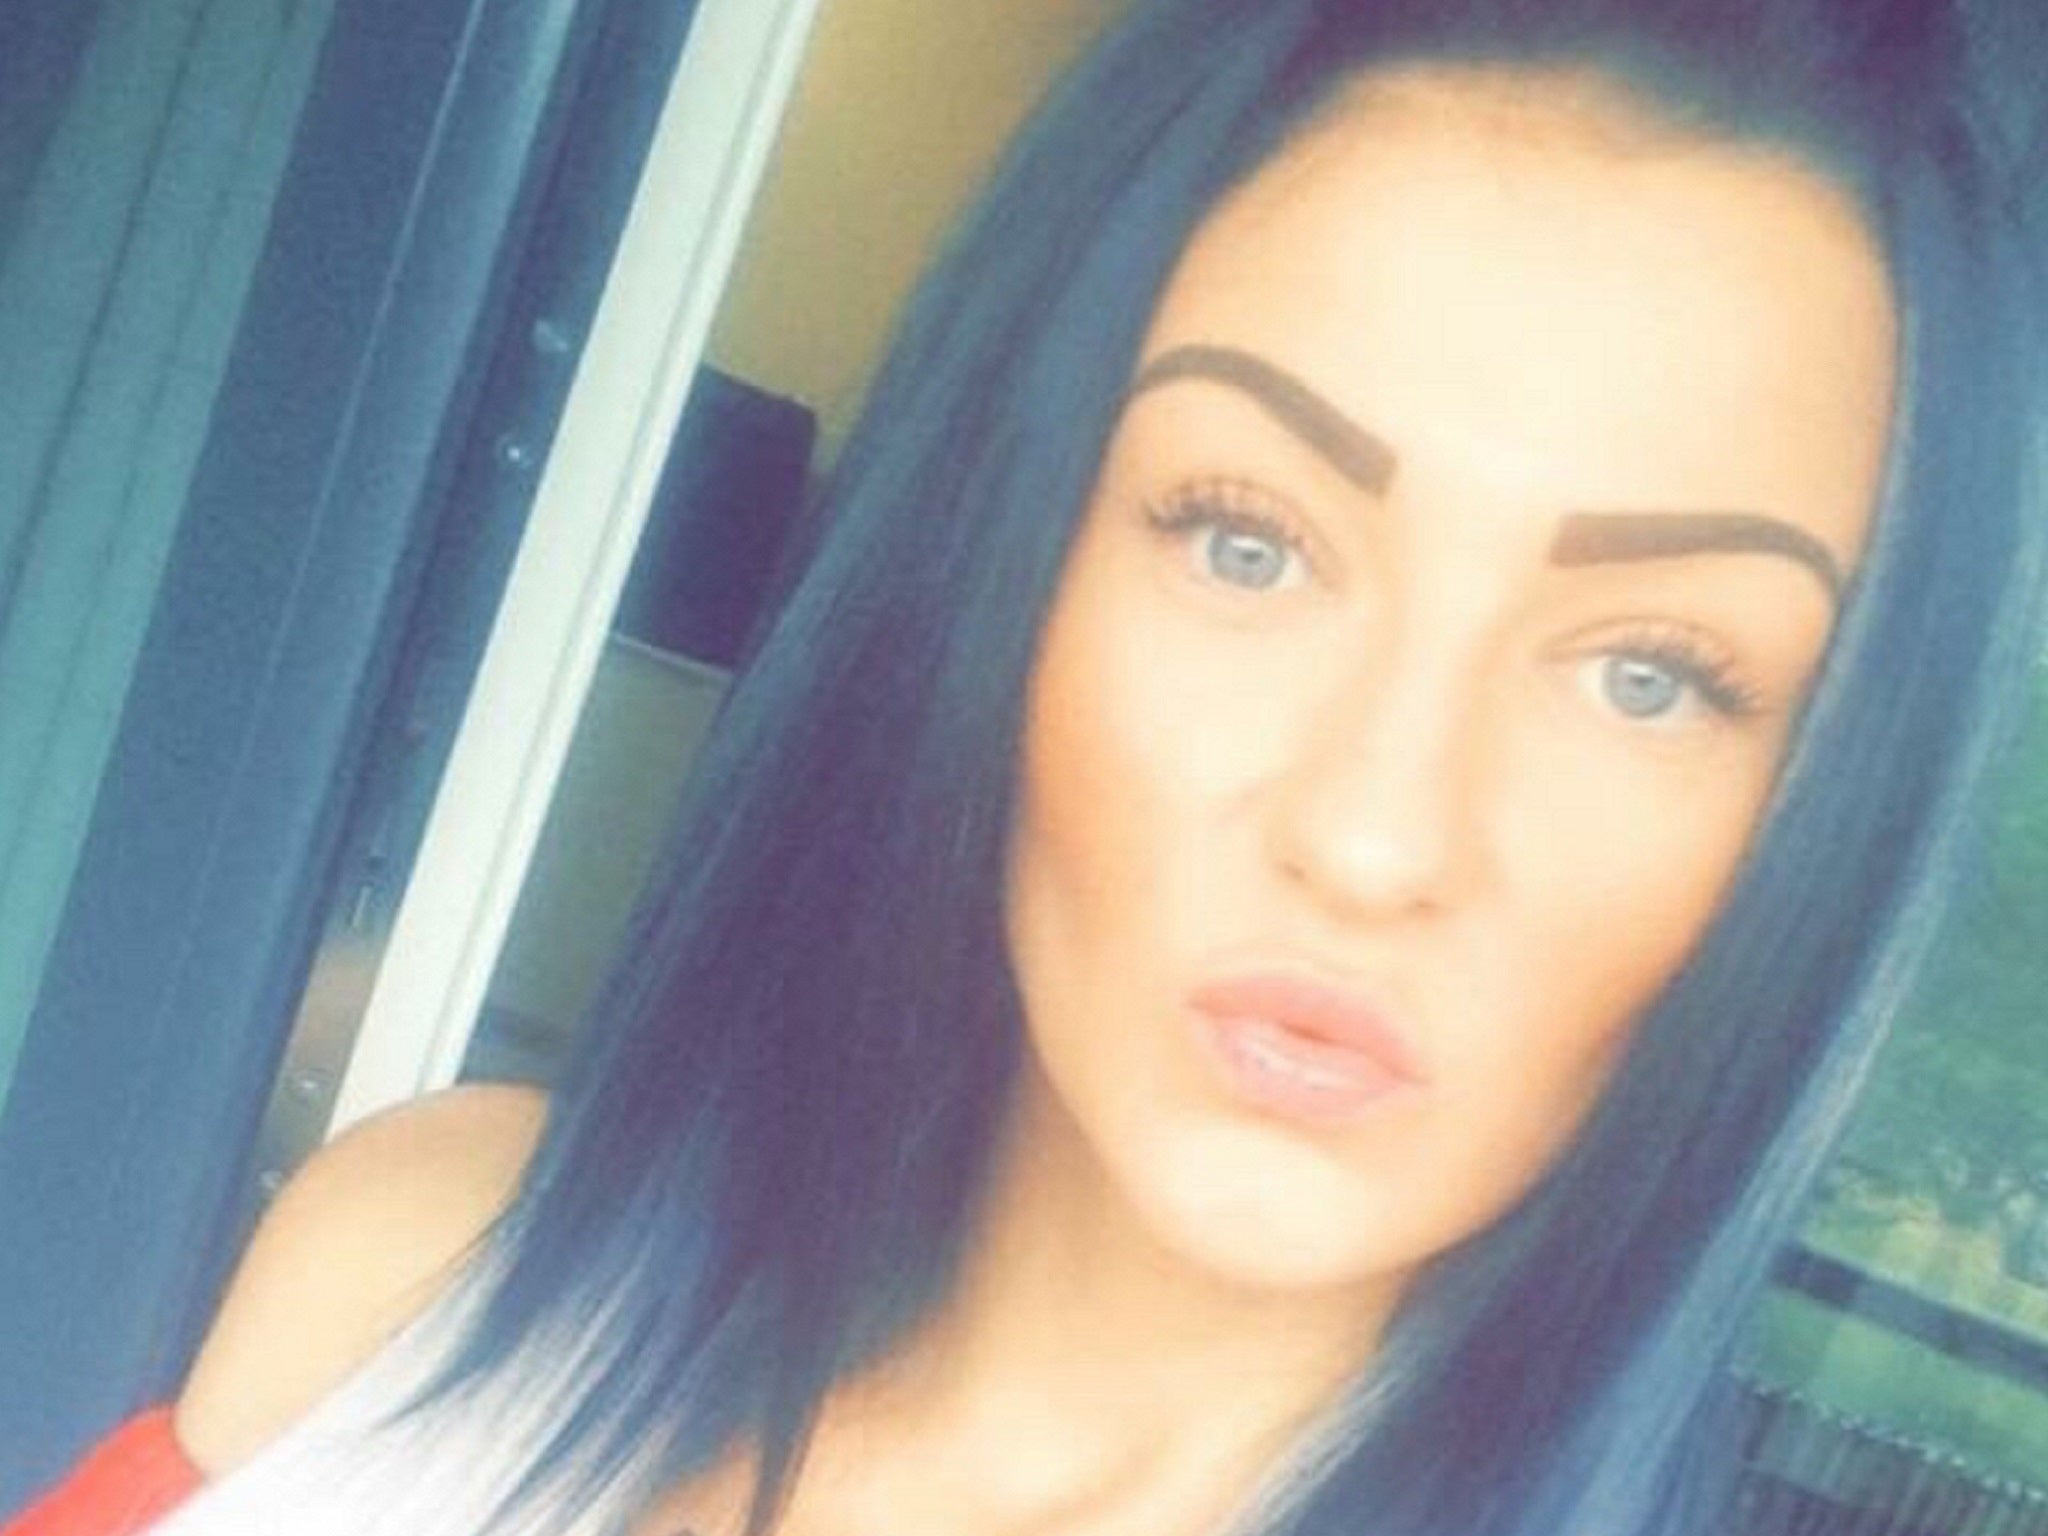 Chelsie Thomas, 26, had an ectopic pregnancy and has been left unable to conceive naturally